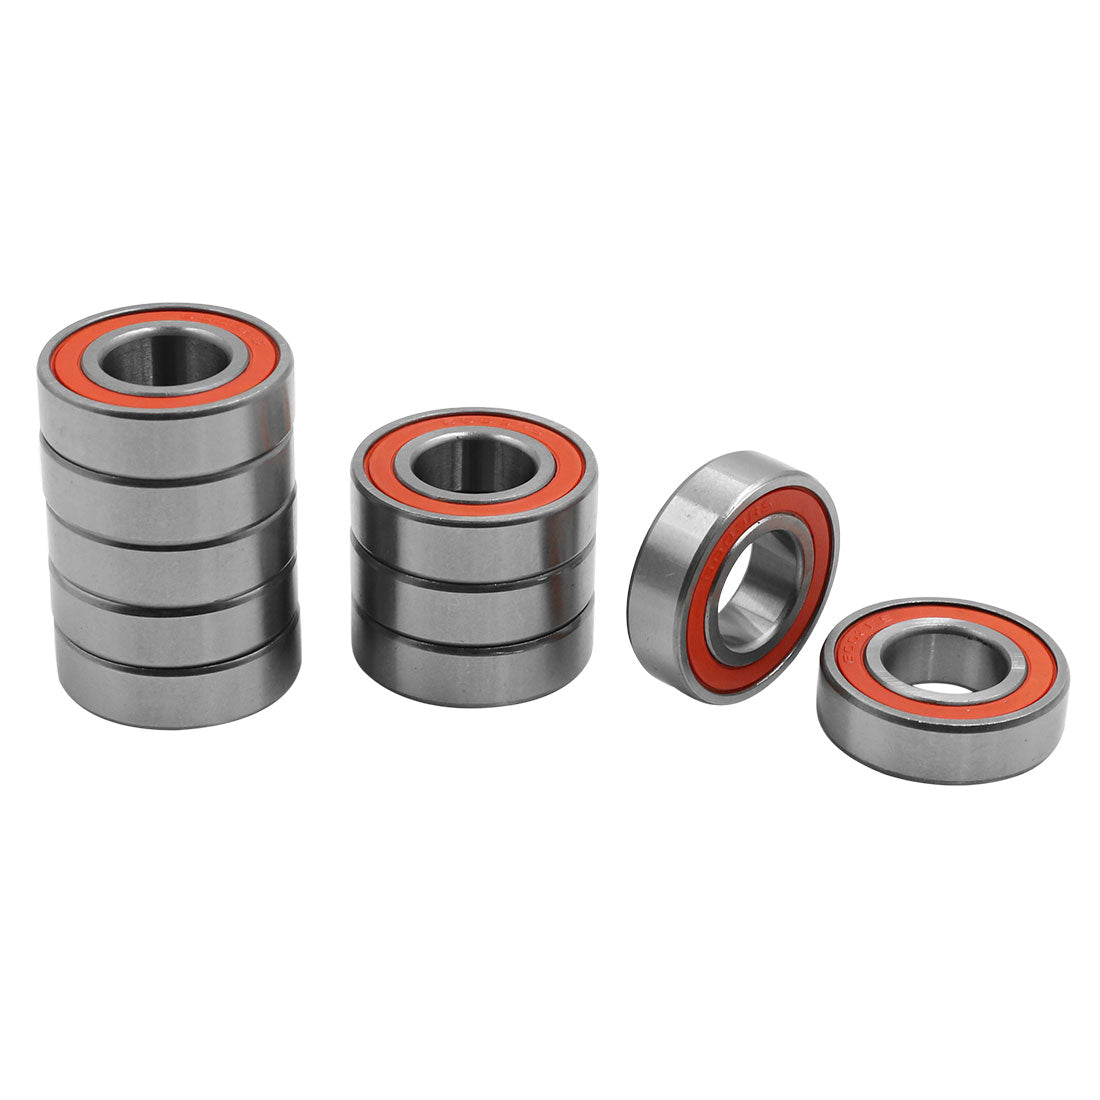 uxcell Uxcell 10pcs Universal 6204RS Deep Groove Sealed Shielded Ball Bearing 47 x 20 x 14mm